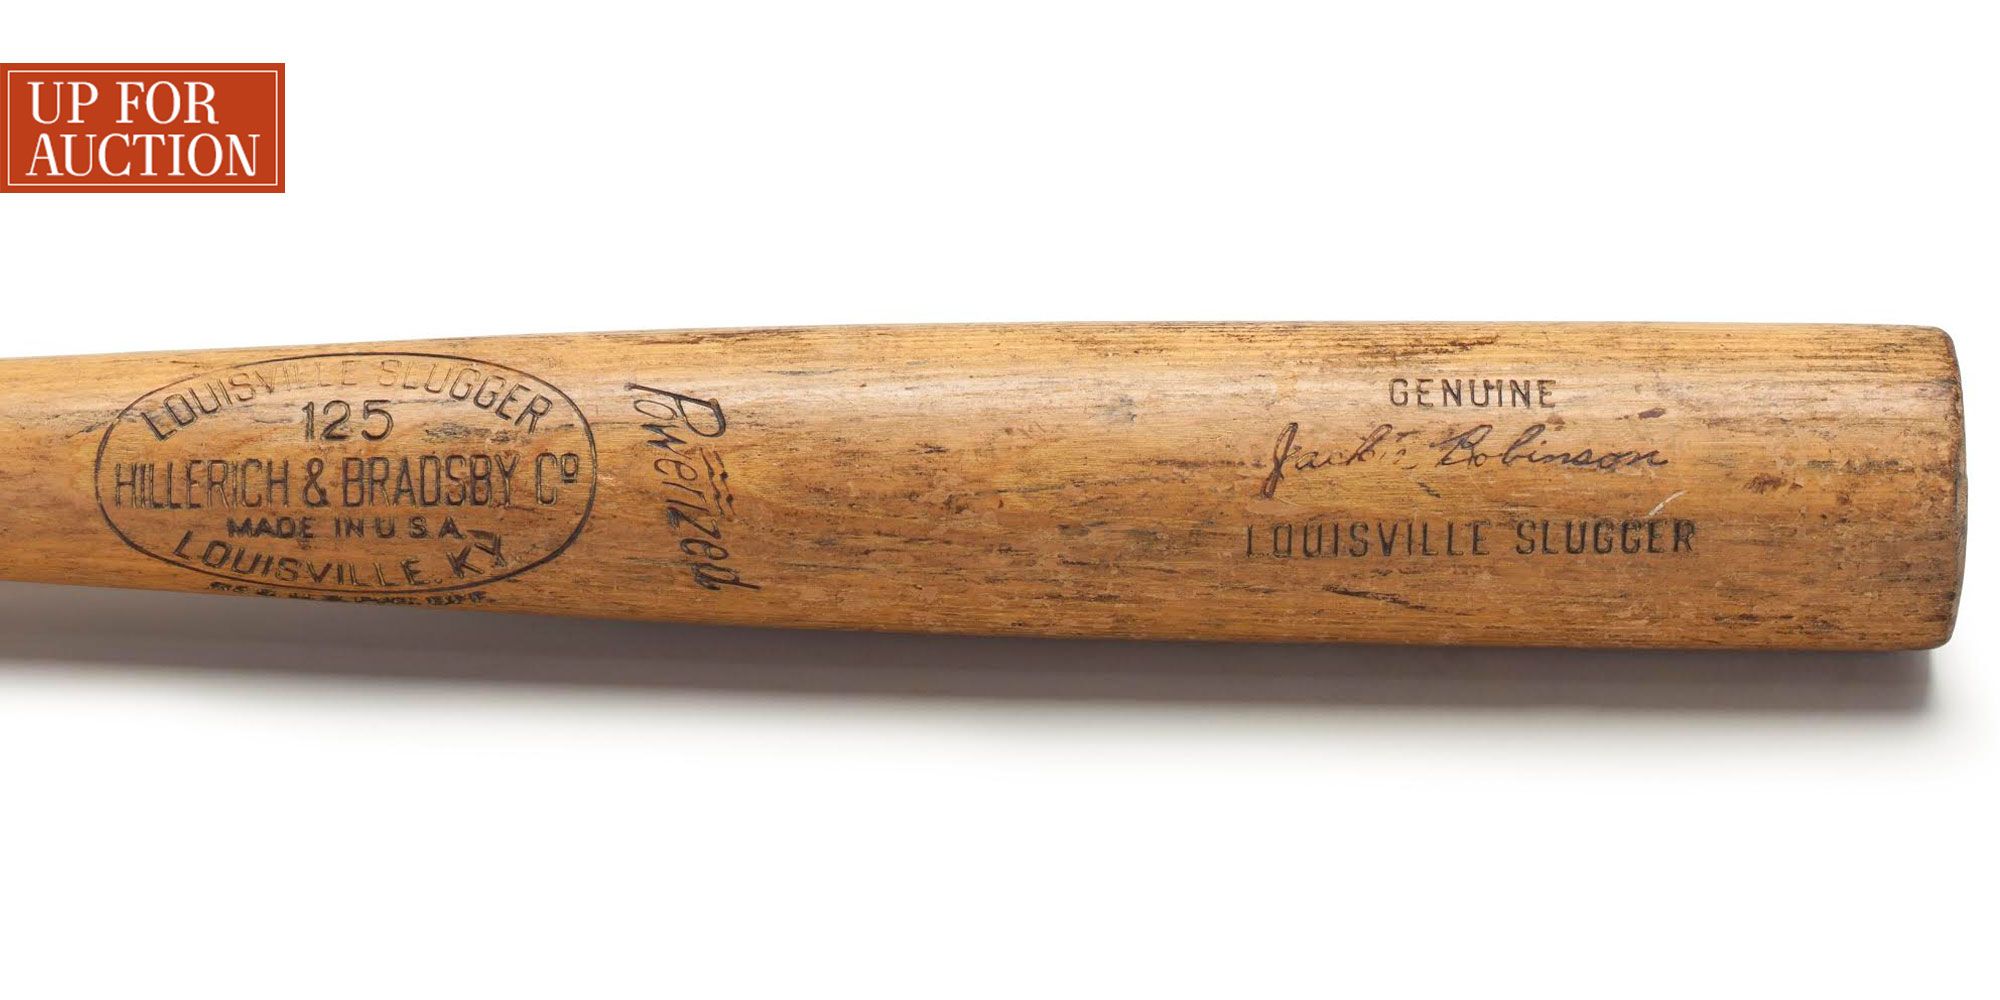 Up For Auction Jackie Robinsons Bat